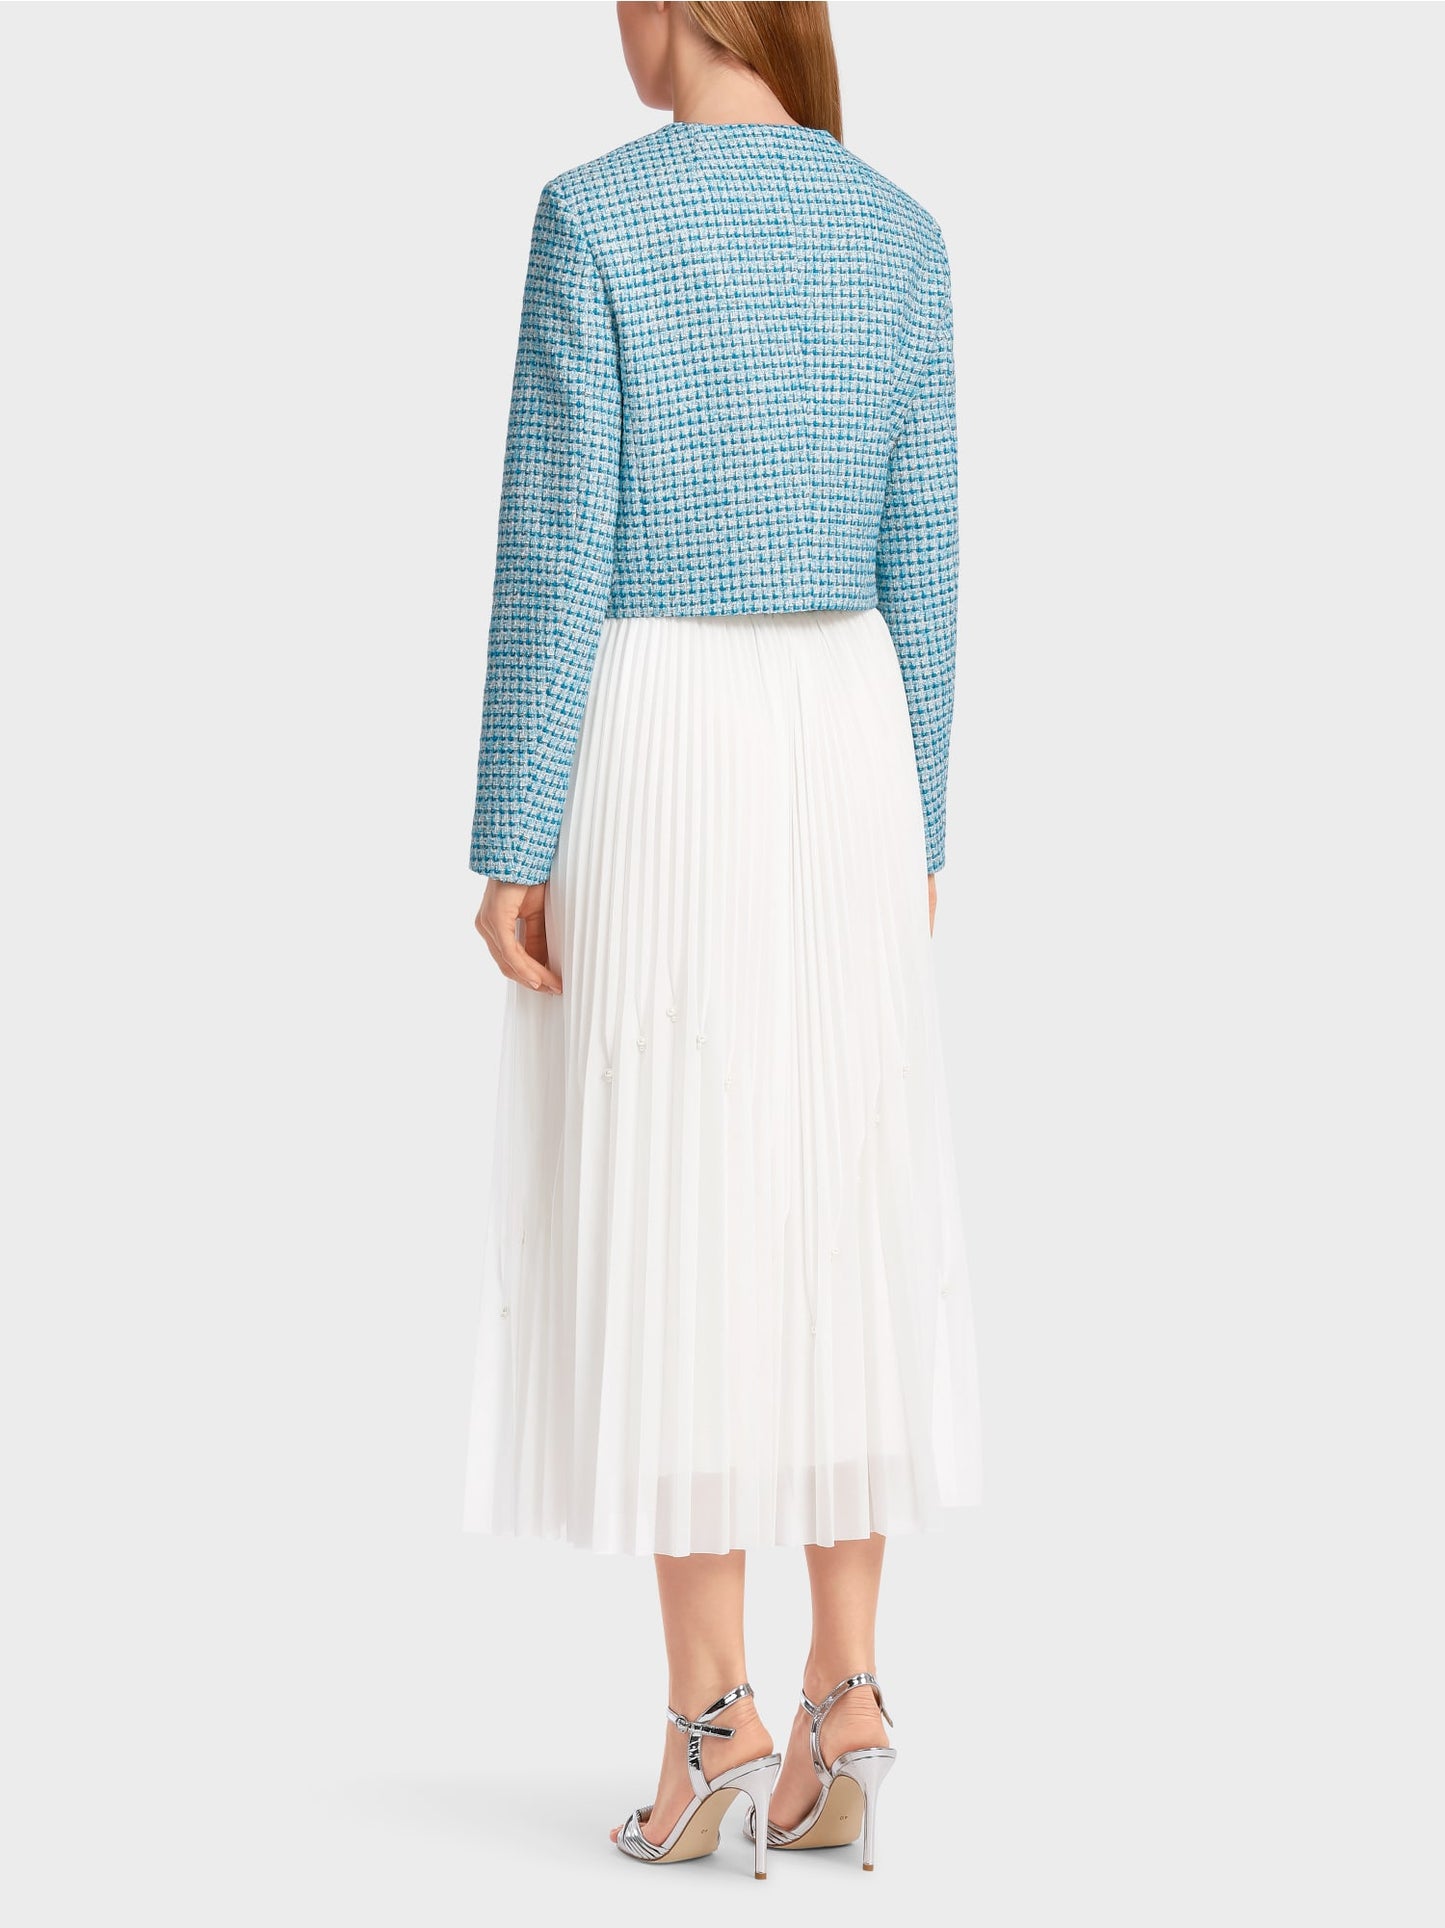 Marc Cain Pleated Skirt with Pearls